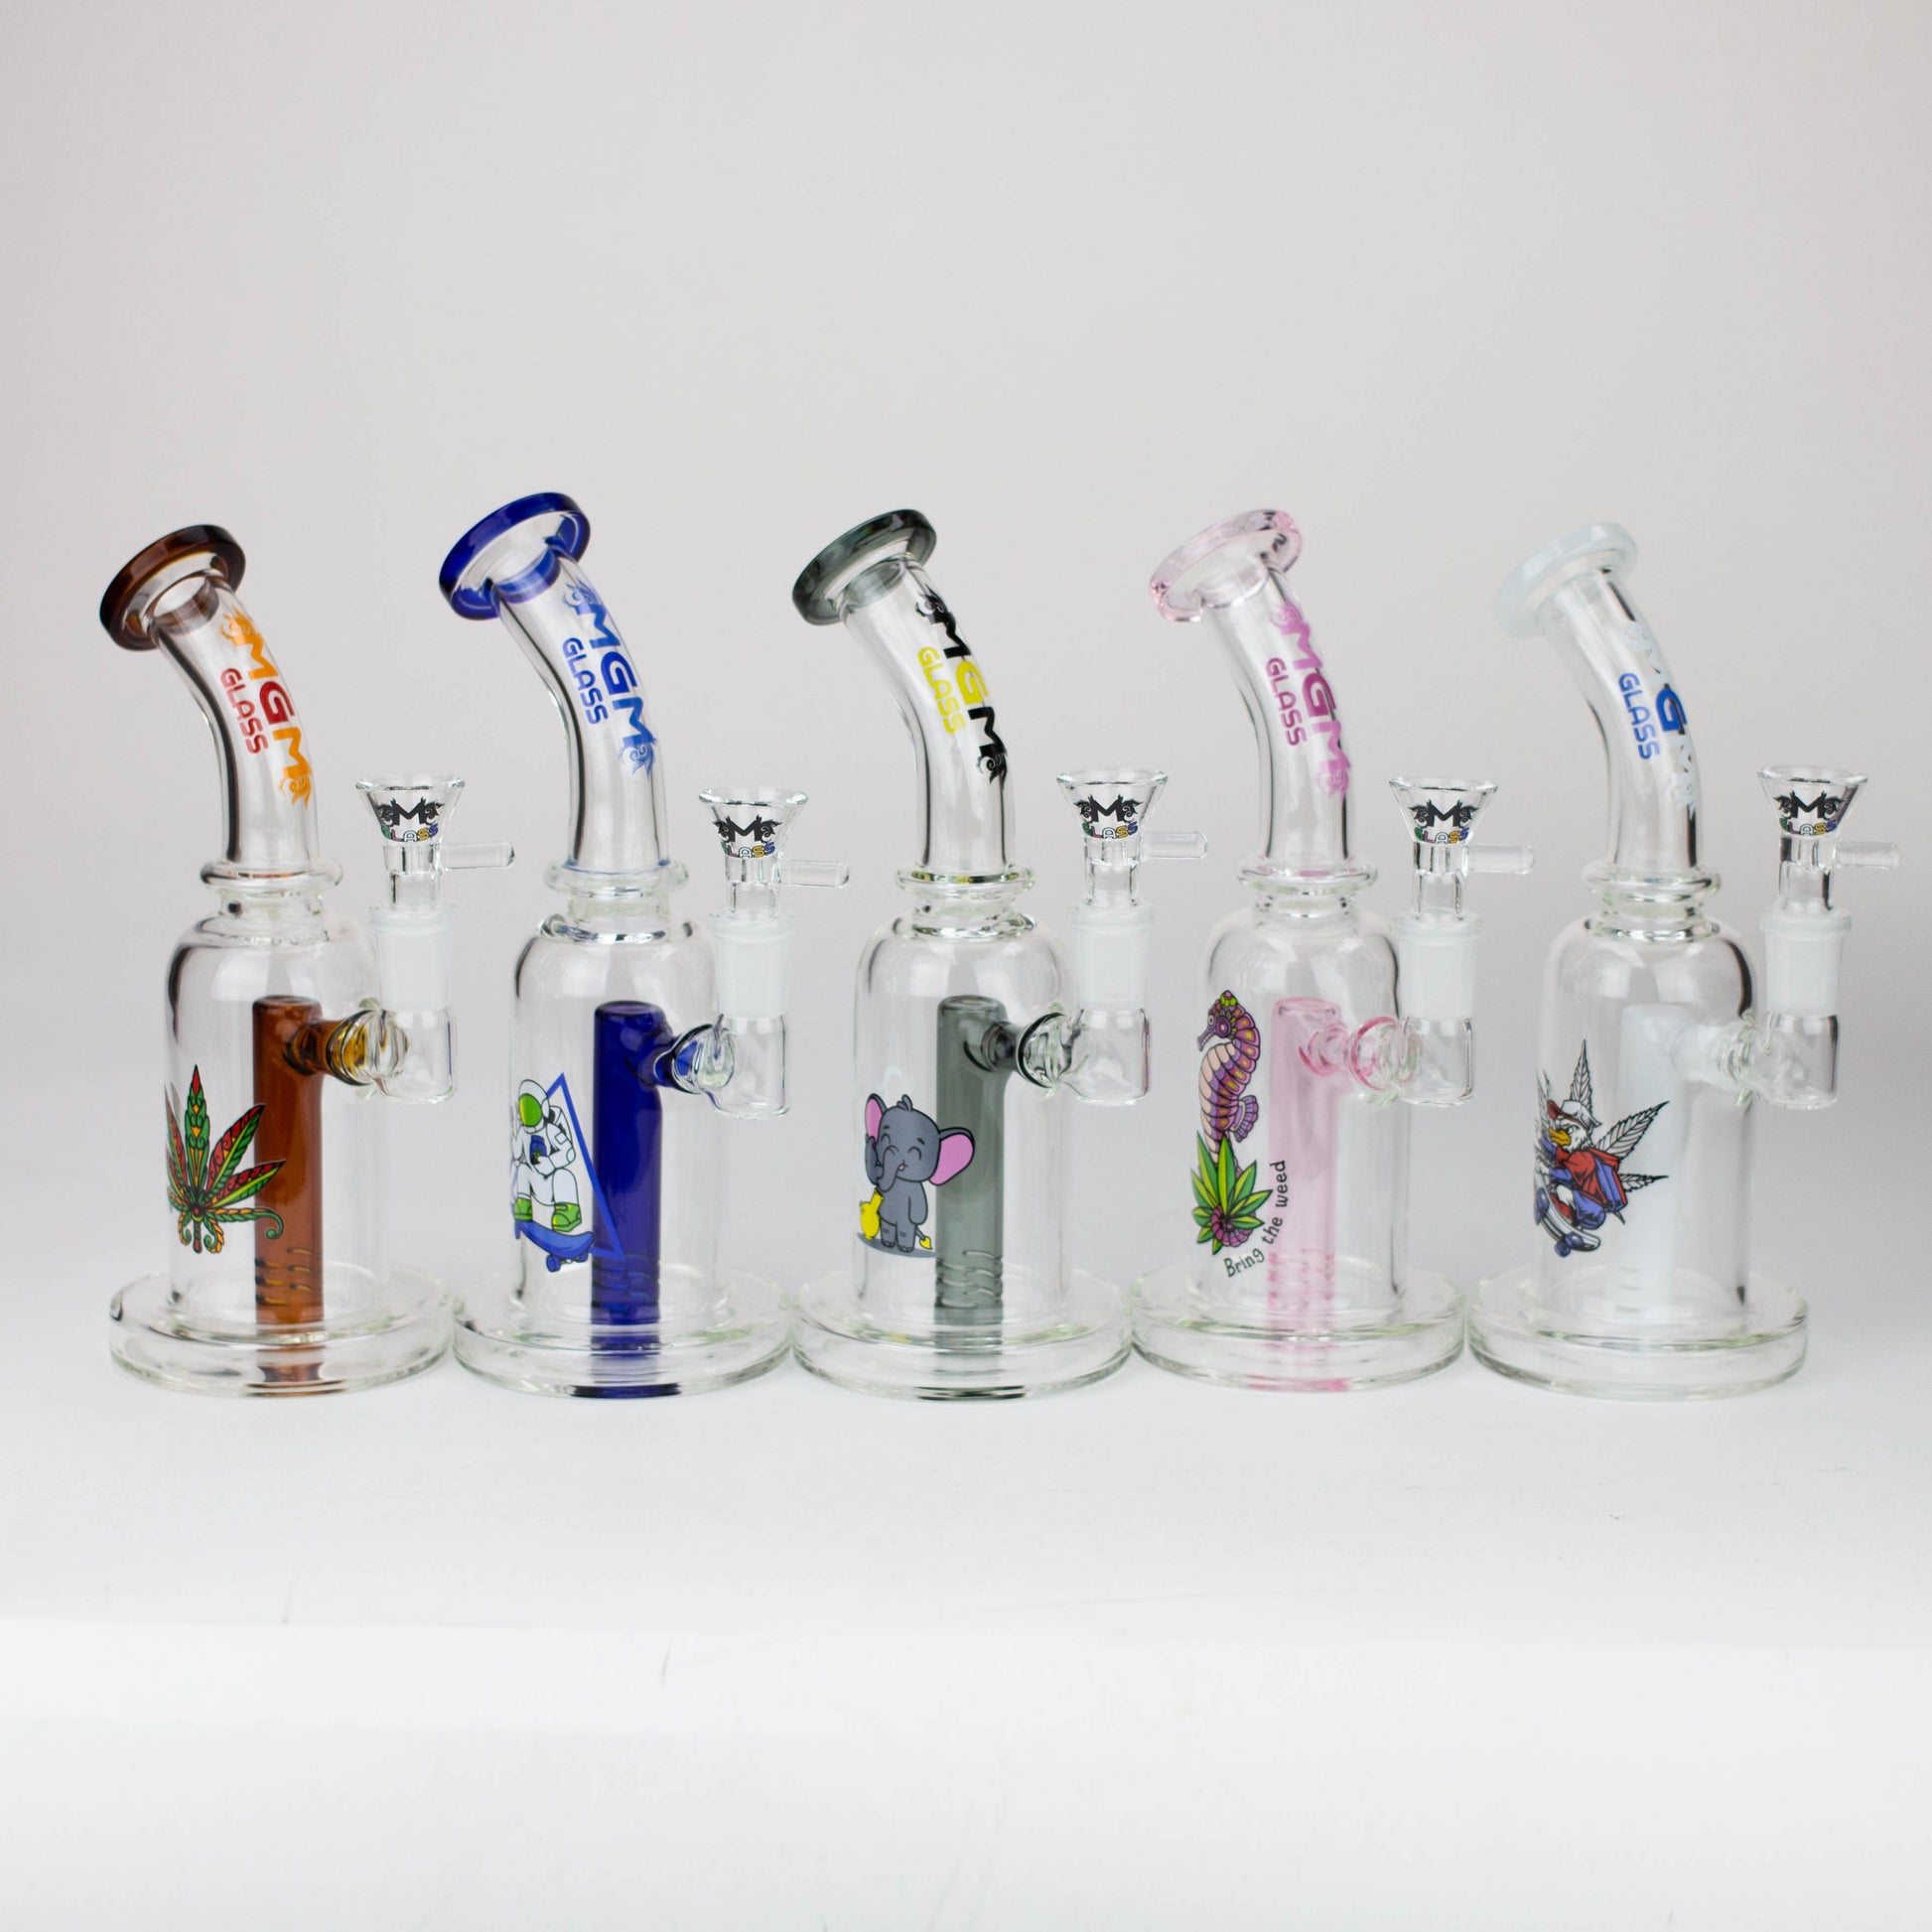 5.7" MGM Glass 2-in-1 bubbler with graphic [C2677]_5